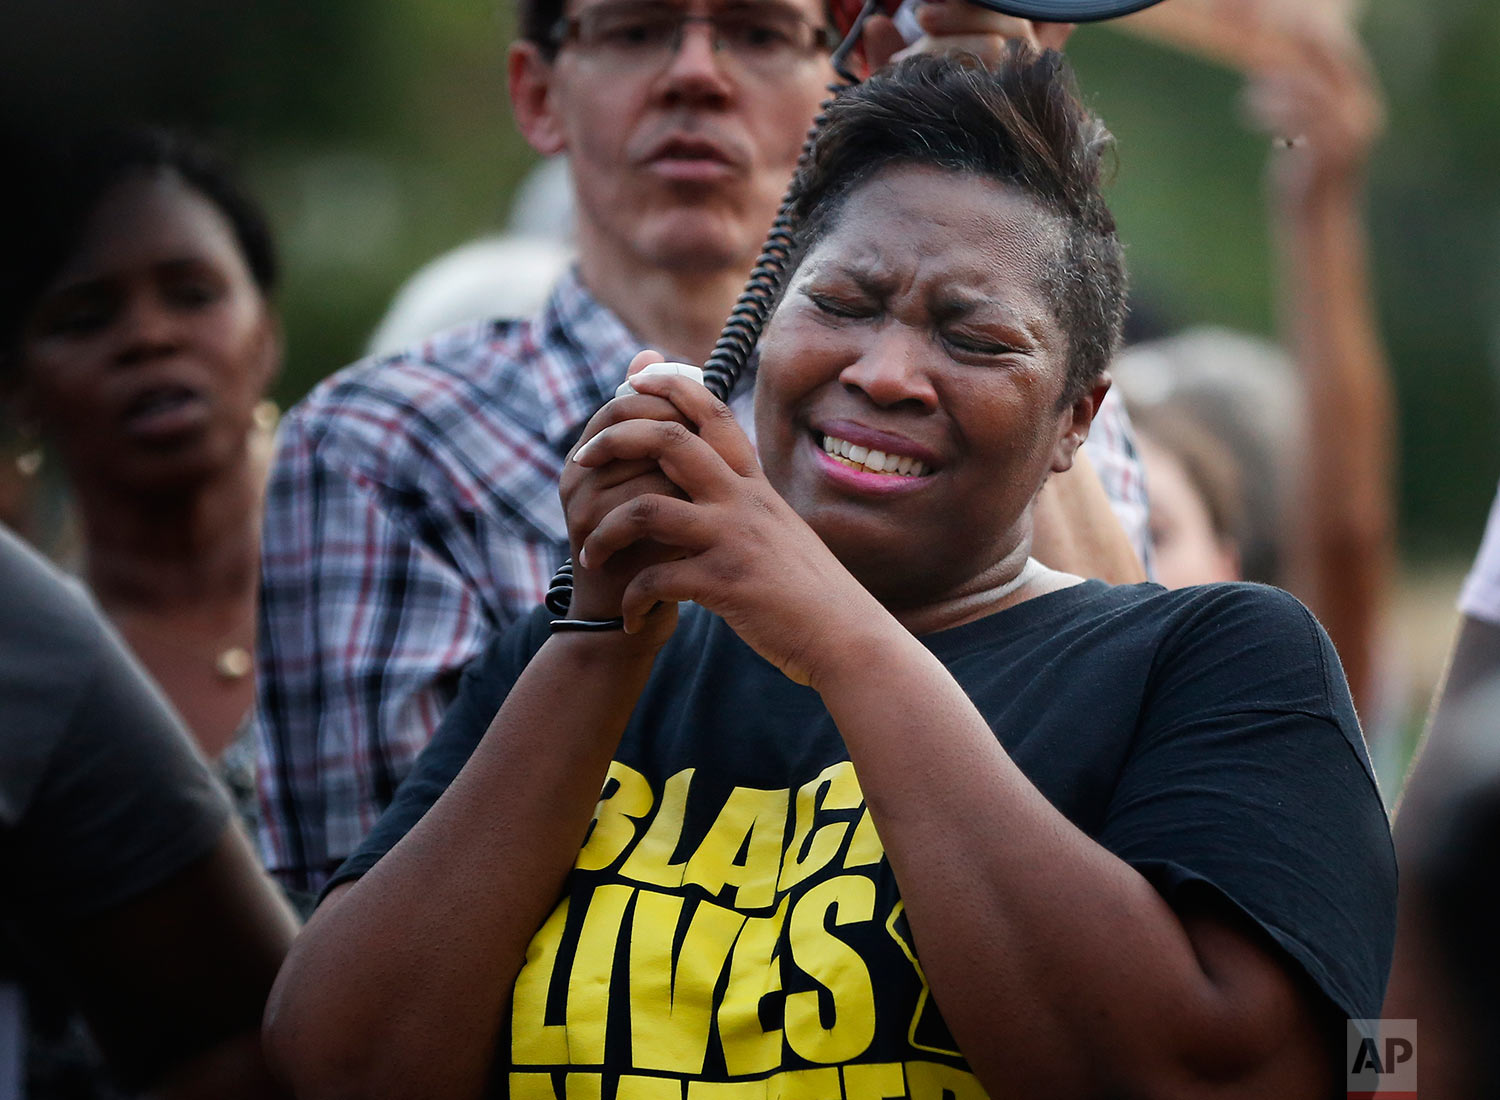  Cara McClure, of Birmingham, Ala, cries during a solidarity gathering Sunday, Aug. 13, 2017, in Birmingham for the victims in Charlottesville, Va. (AP Photo/Brynn Anderson) 